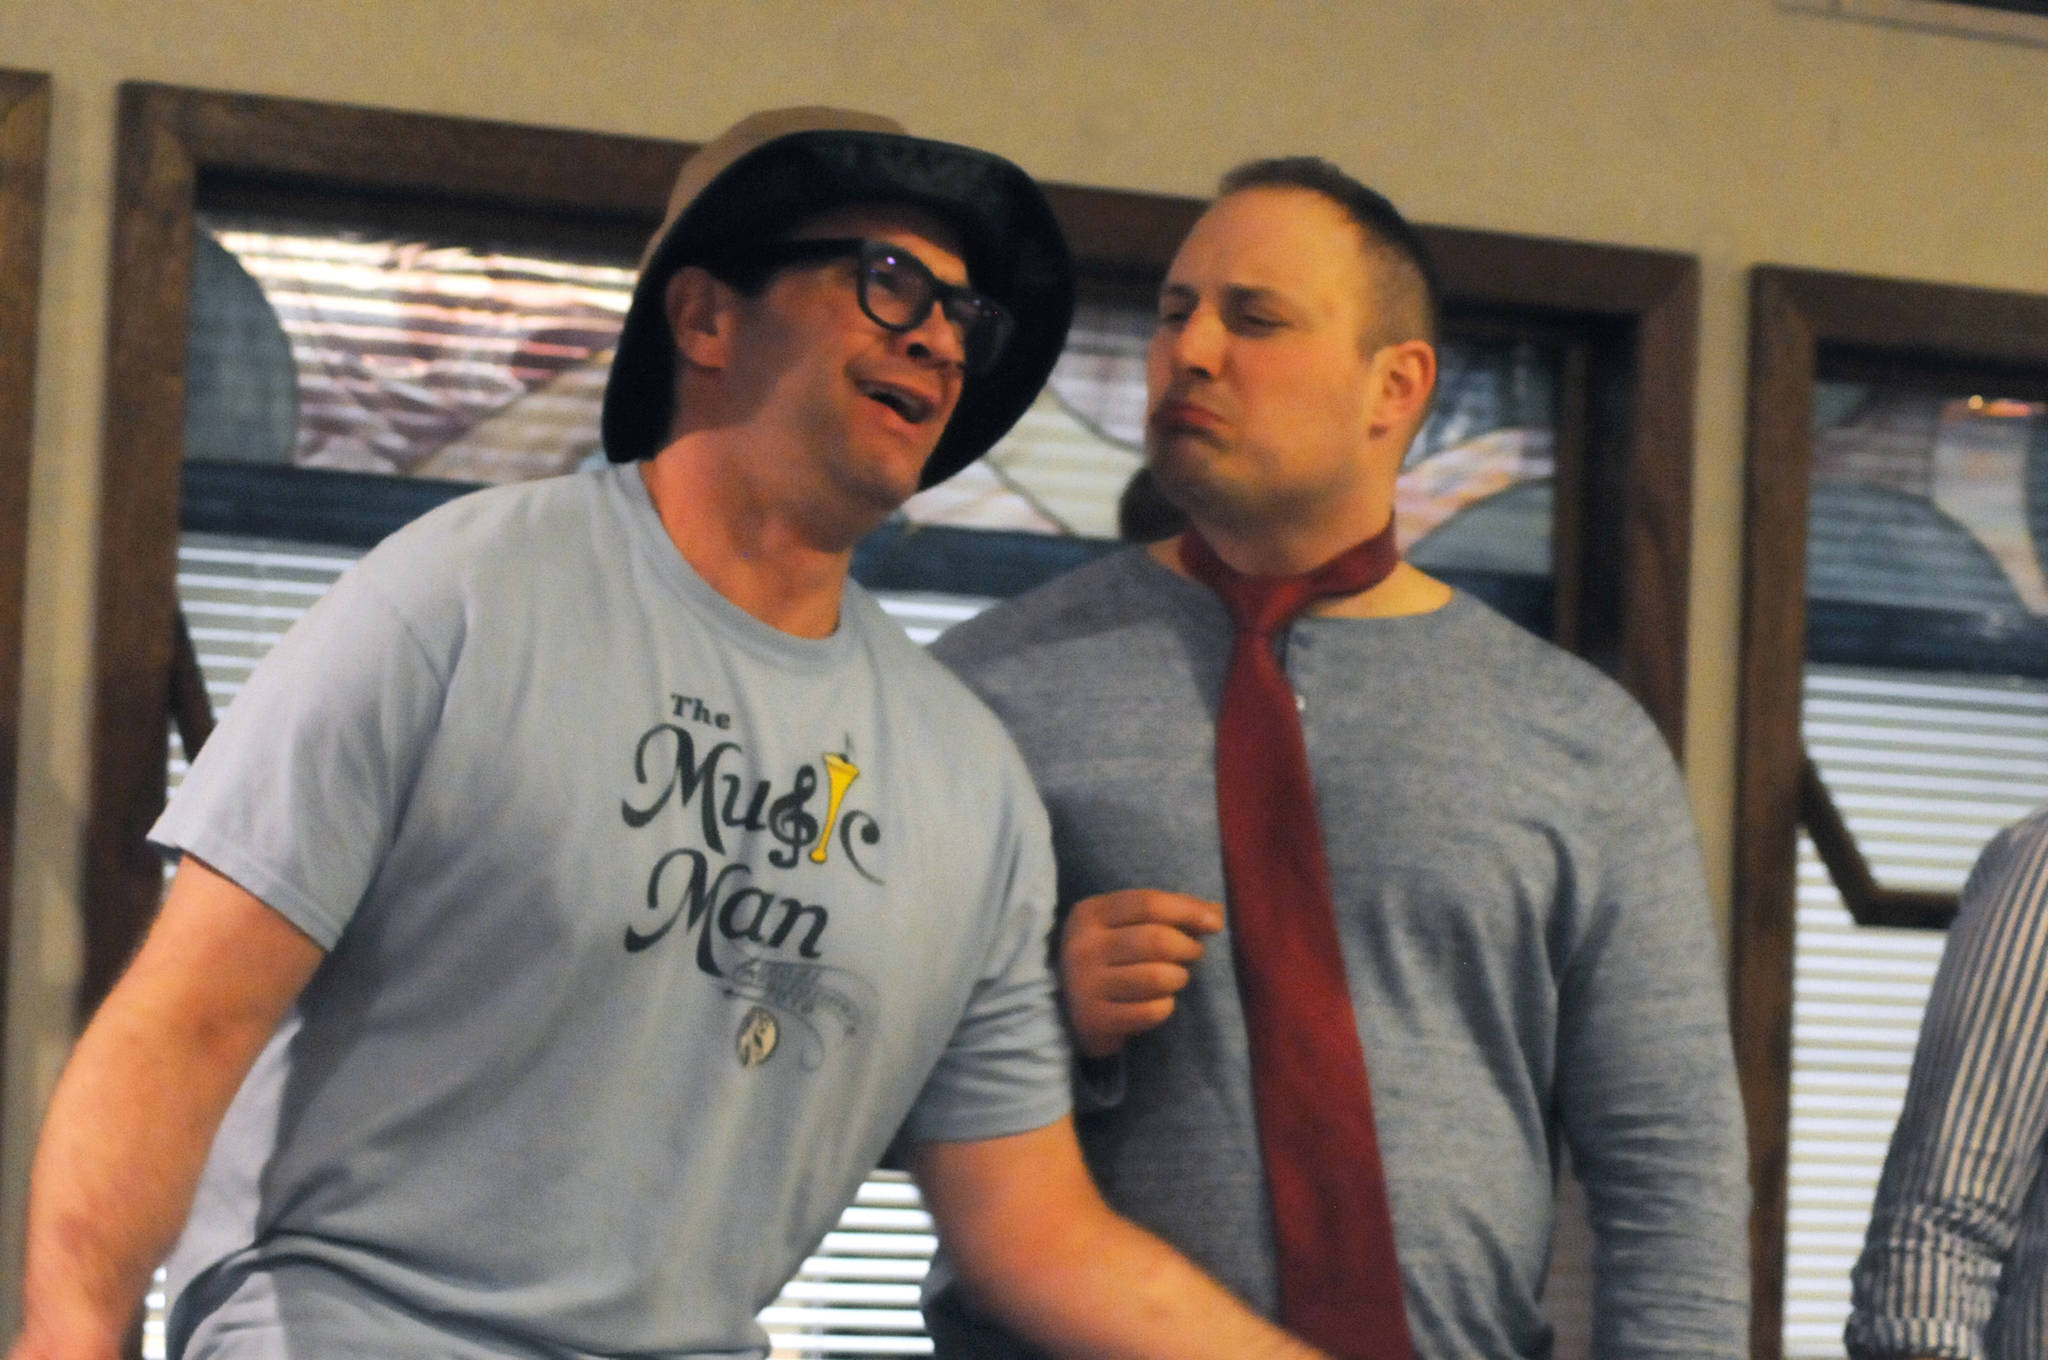 Chris Pepper (left) and Tyler Payment (right) play out a scene during a rehearsal for Triumvirate Theatre’s production of “Forrest Guppy” on Tuesday, March 20, 2018 in Soldotna, Alaska. Pepper plays Forrest Guppy, a parody of the main character from the classic film “Forrest Gump,” in the comedy parody of the film, while Payment reprises his role as President Donald Trump from the theater’s fall 2016 production of “Lame Ducks and Dark Horses.” The theater troupe last put on the dinner theater production in 2010. (Photo by Elizabeth Earl/Peninsula Clarion)